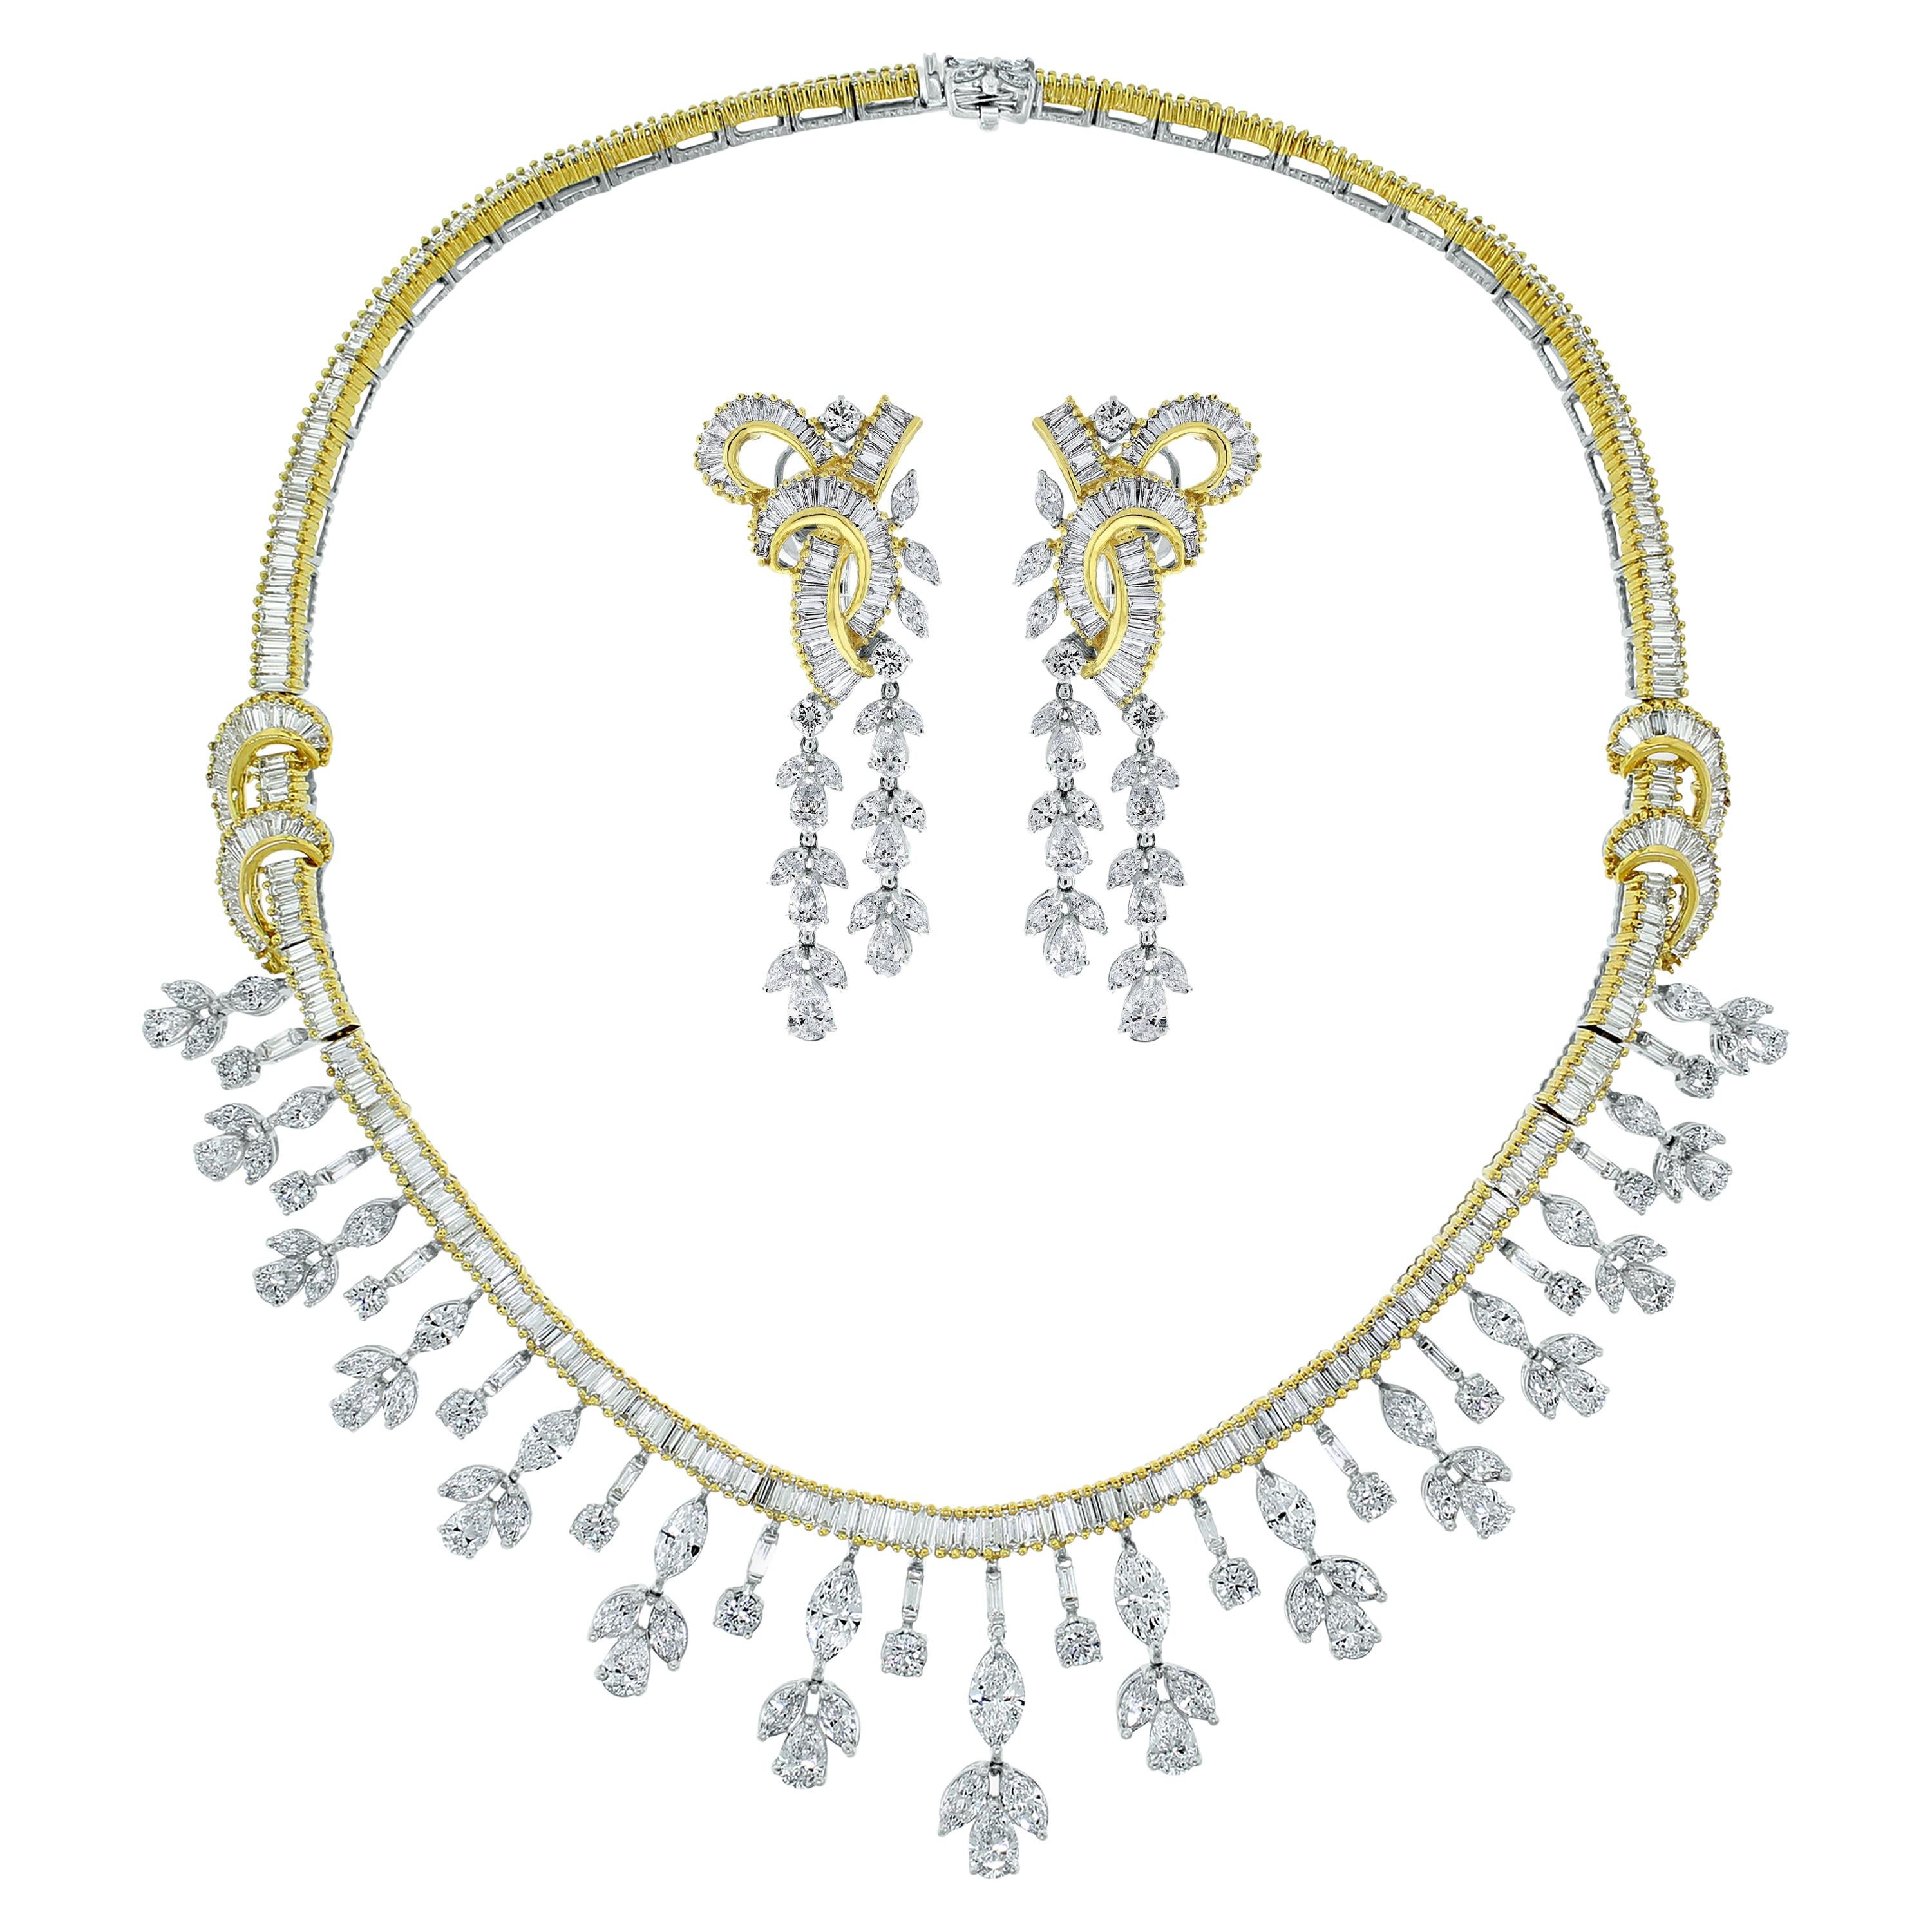 Beauvince Scintilla Necklace and Earrings Suite 37.34 carat Diamonds in Gold